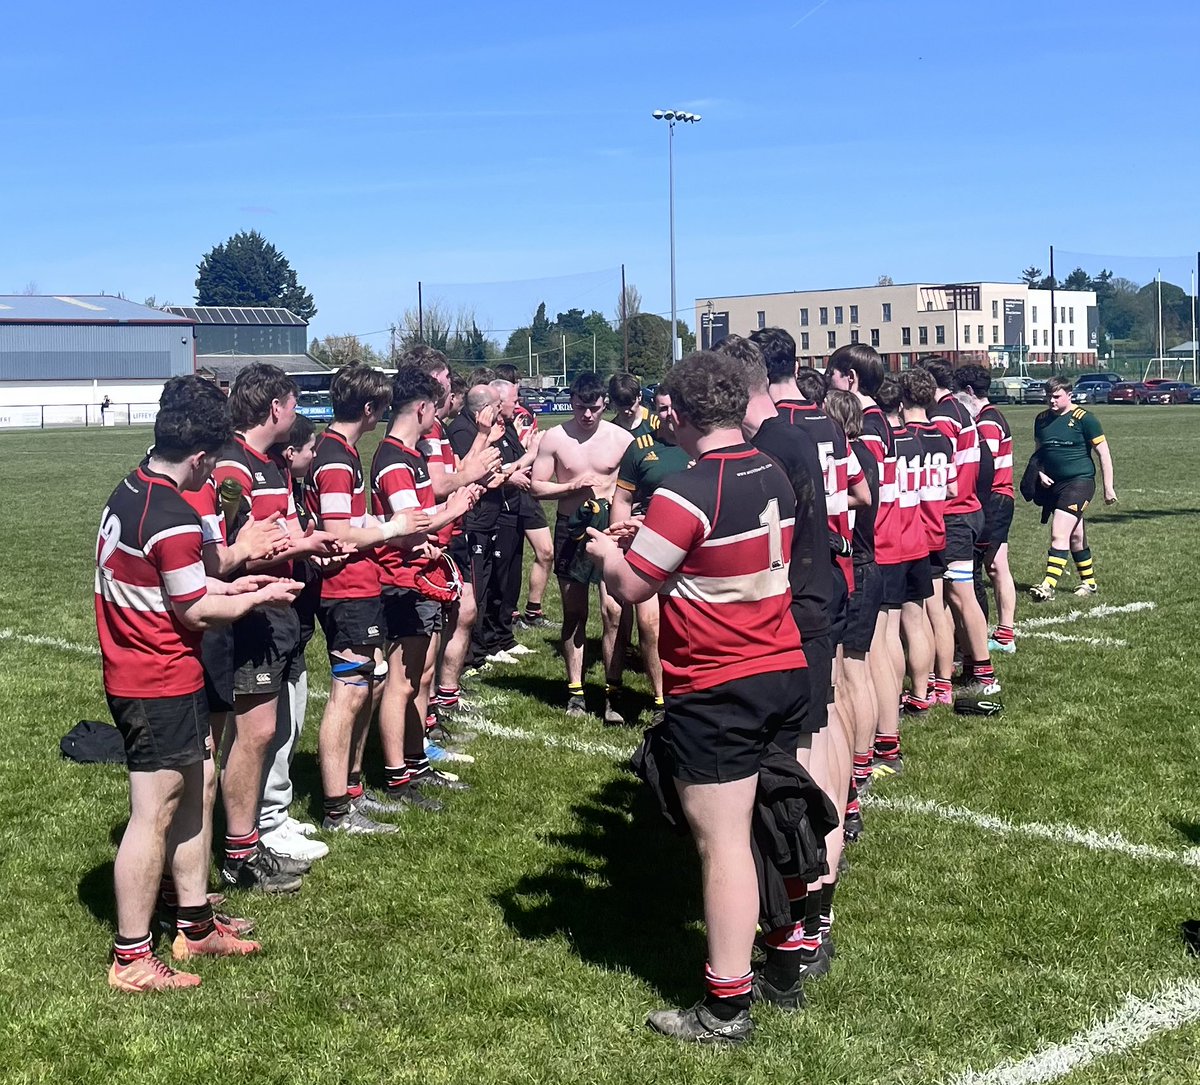 Our under 18 boys are Leinster Premier League Champions after beating a tough @boynerfcofficial side by 39-19 in Athy this afternoon. Congratulations to all the Wicklow boys, their coaches and their families on a proud day for Wicklow RFC. 🔴⚪️⚫️💪💪🏆🏆